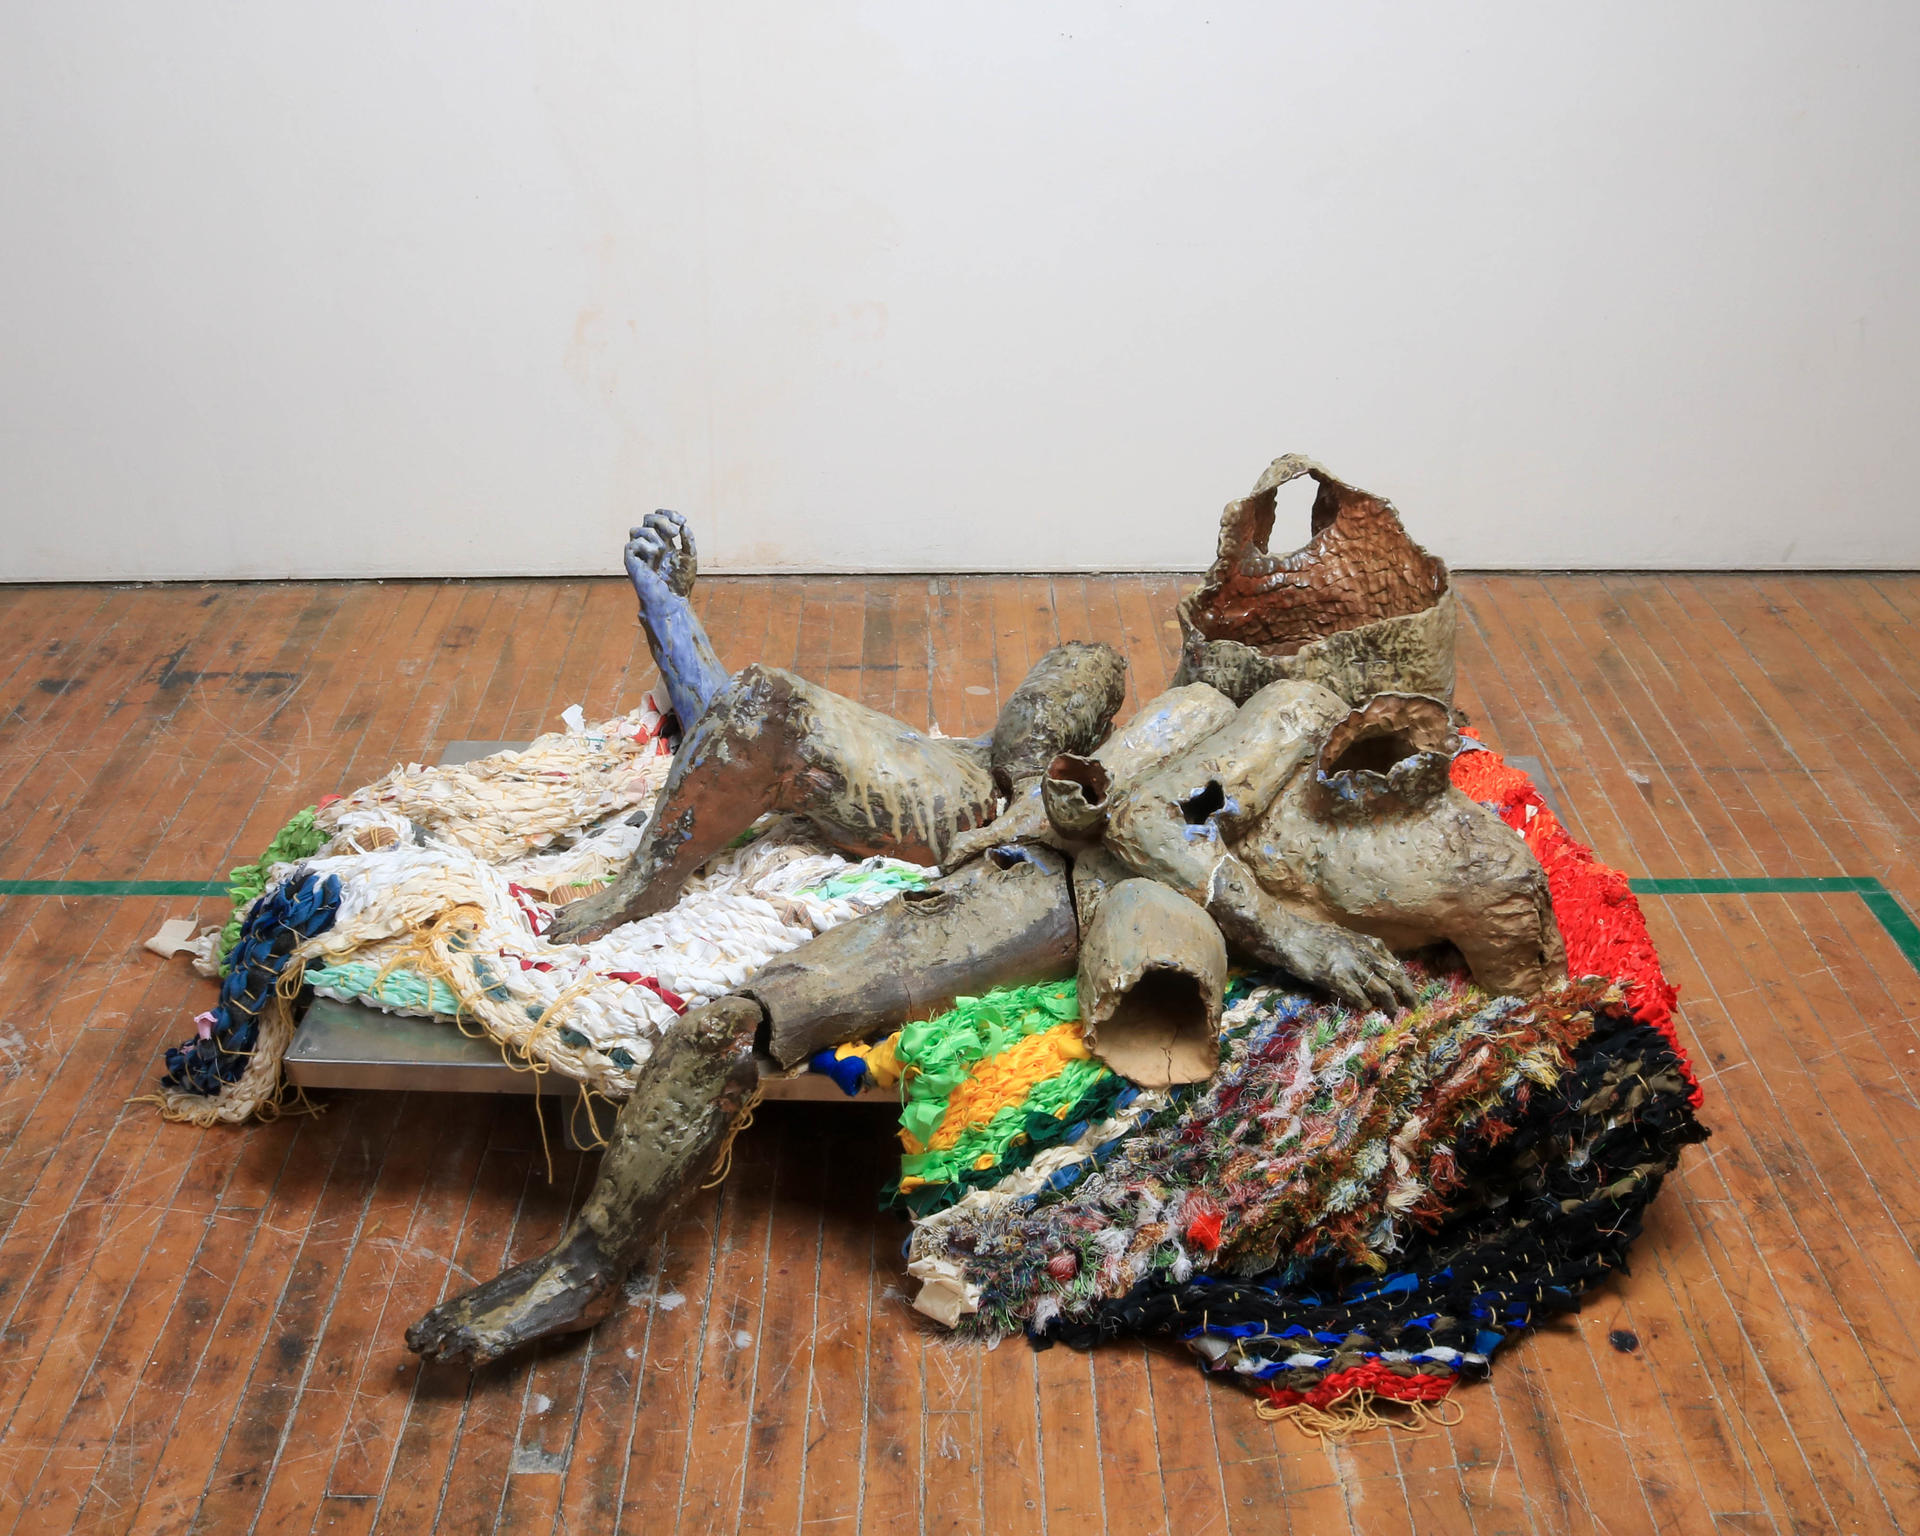 A multi-limbed, fragmented ceramic body reclined on two colorful woven fabrics atop a steel plane. 